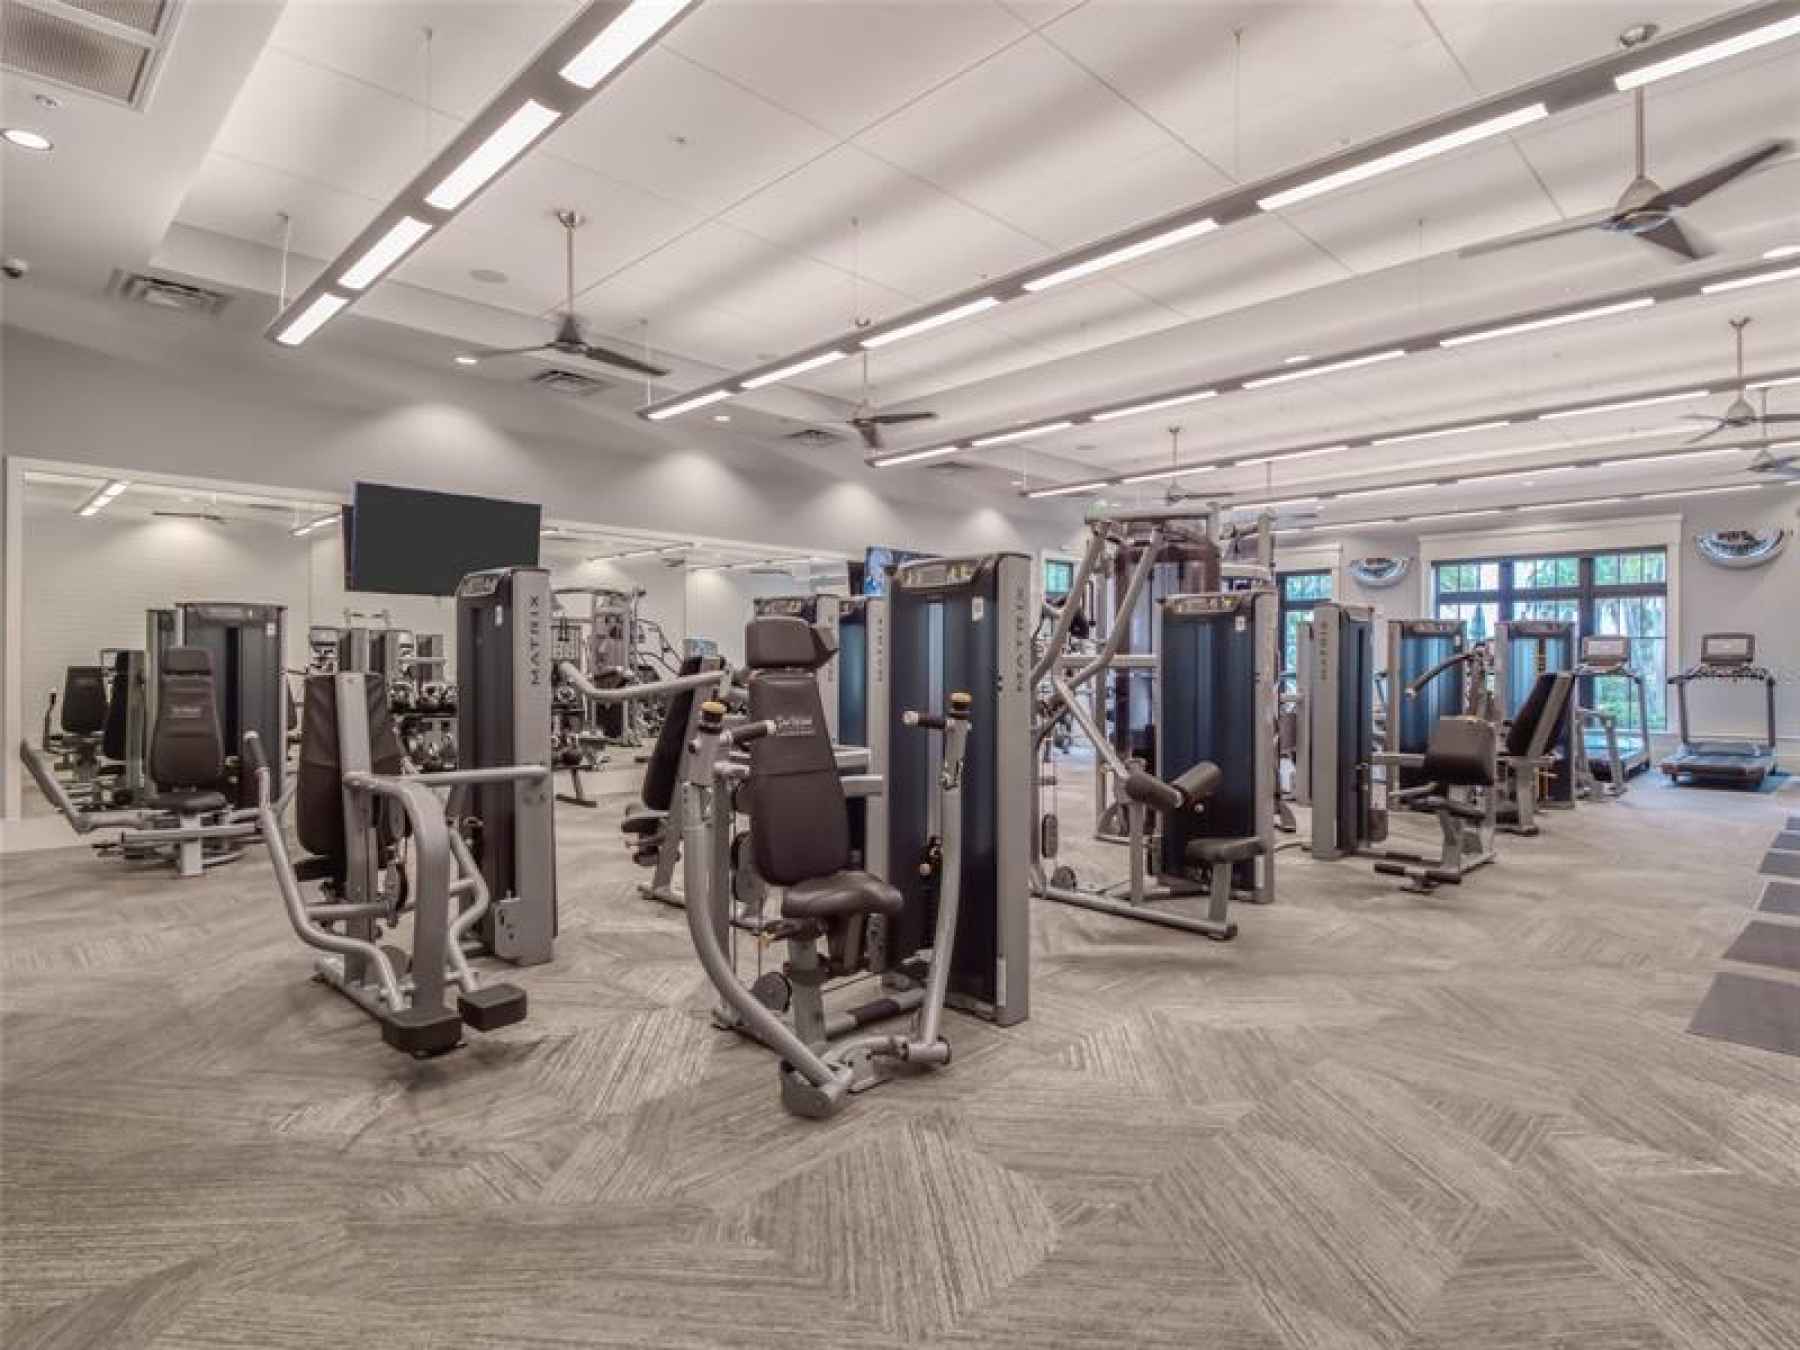 The Fitness Center offers a Room with Exercise Classes as well as machines